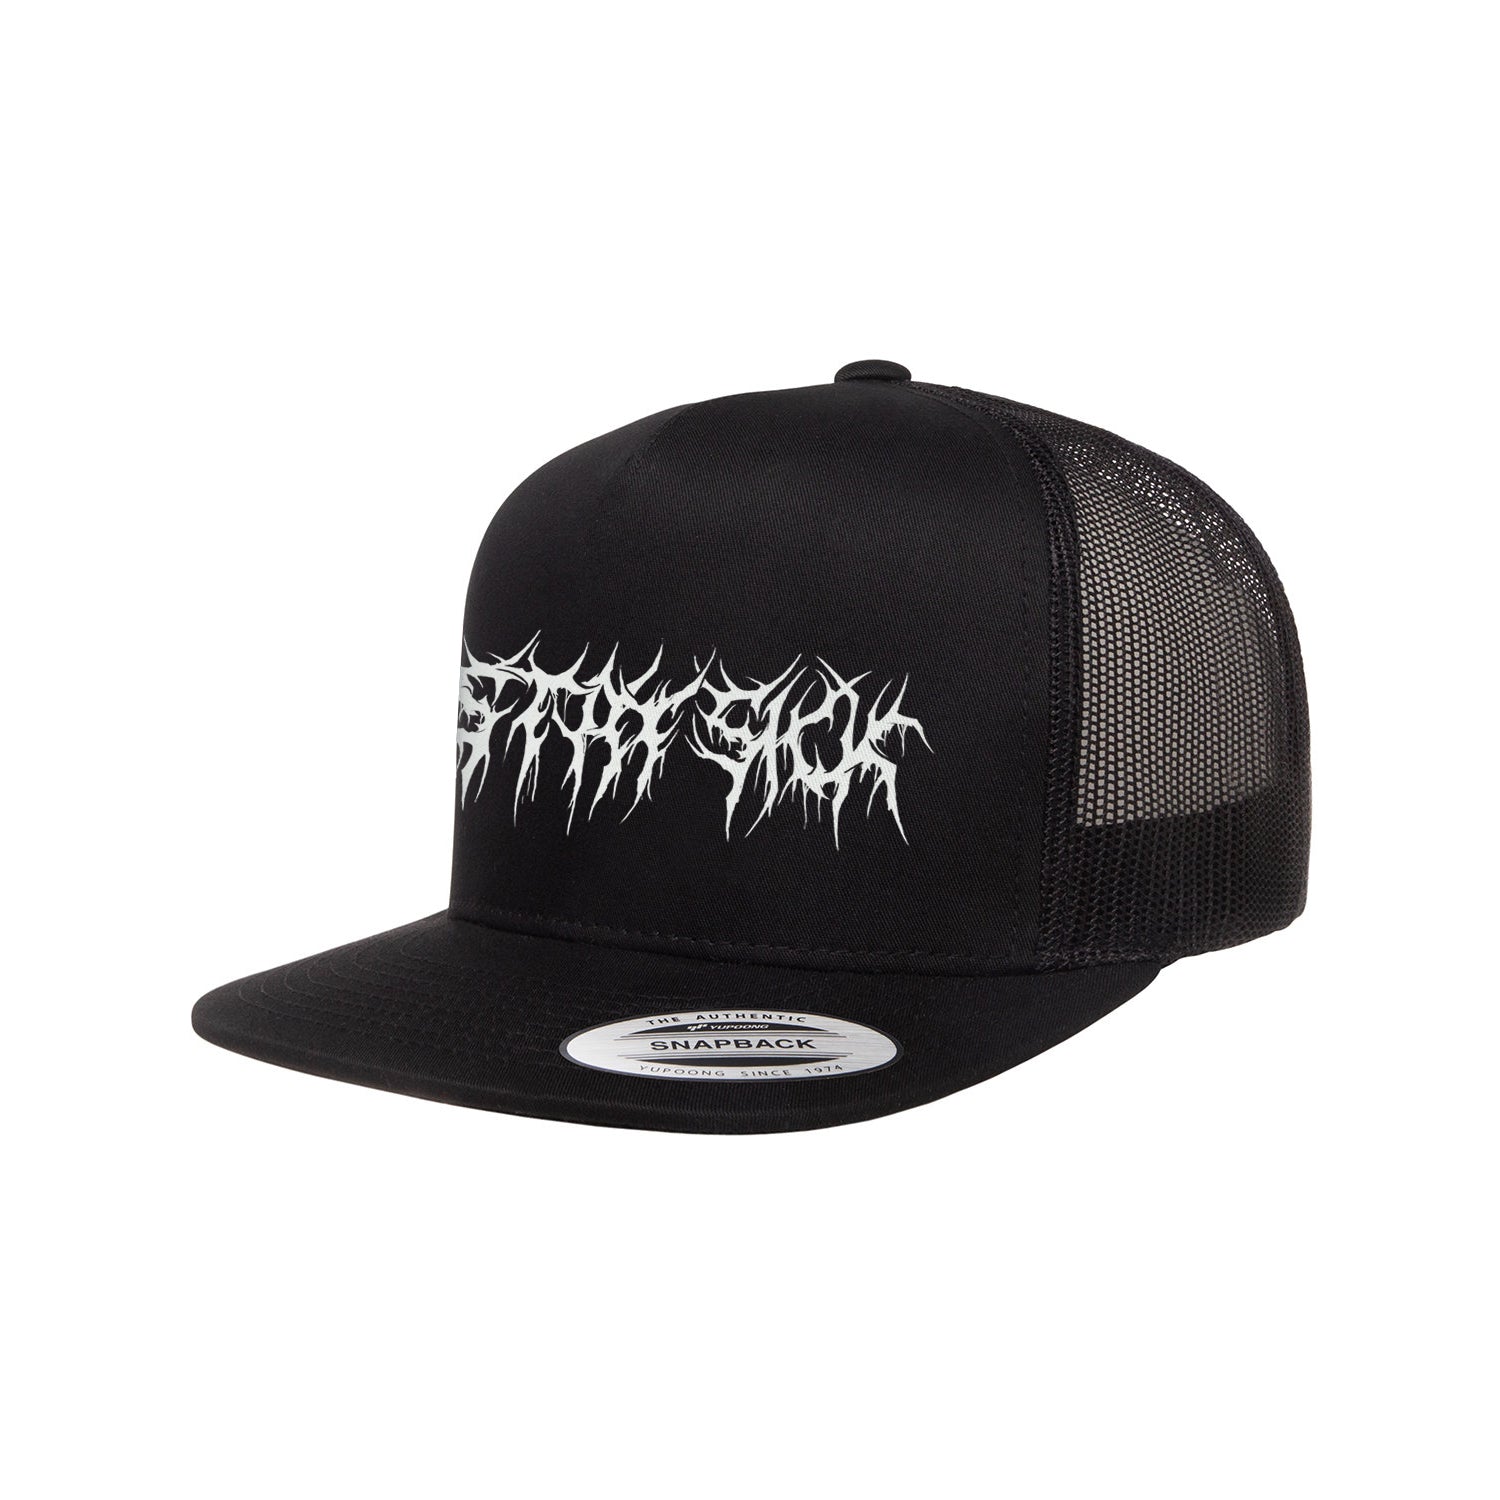 Black Trucker Hat. Stay Sick embroidered on the front in a black metal font. Print is in white.